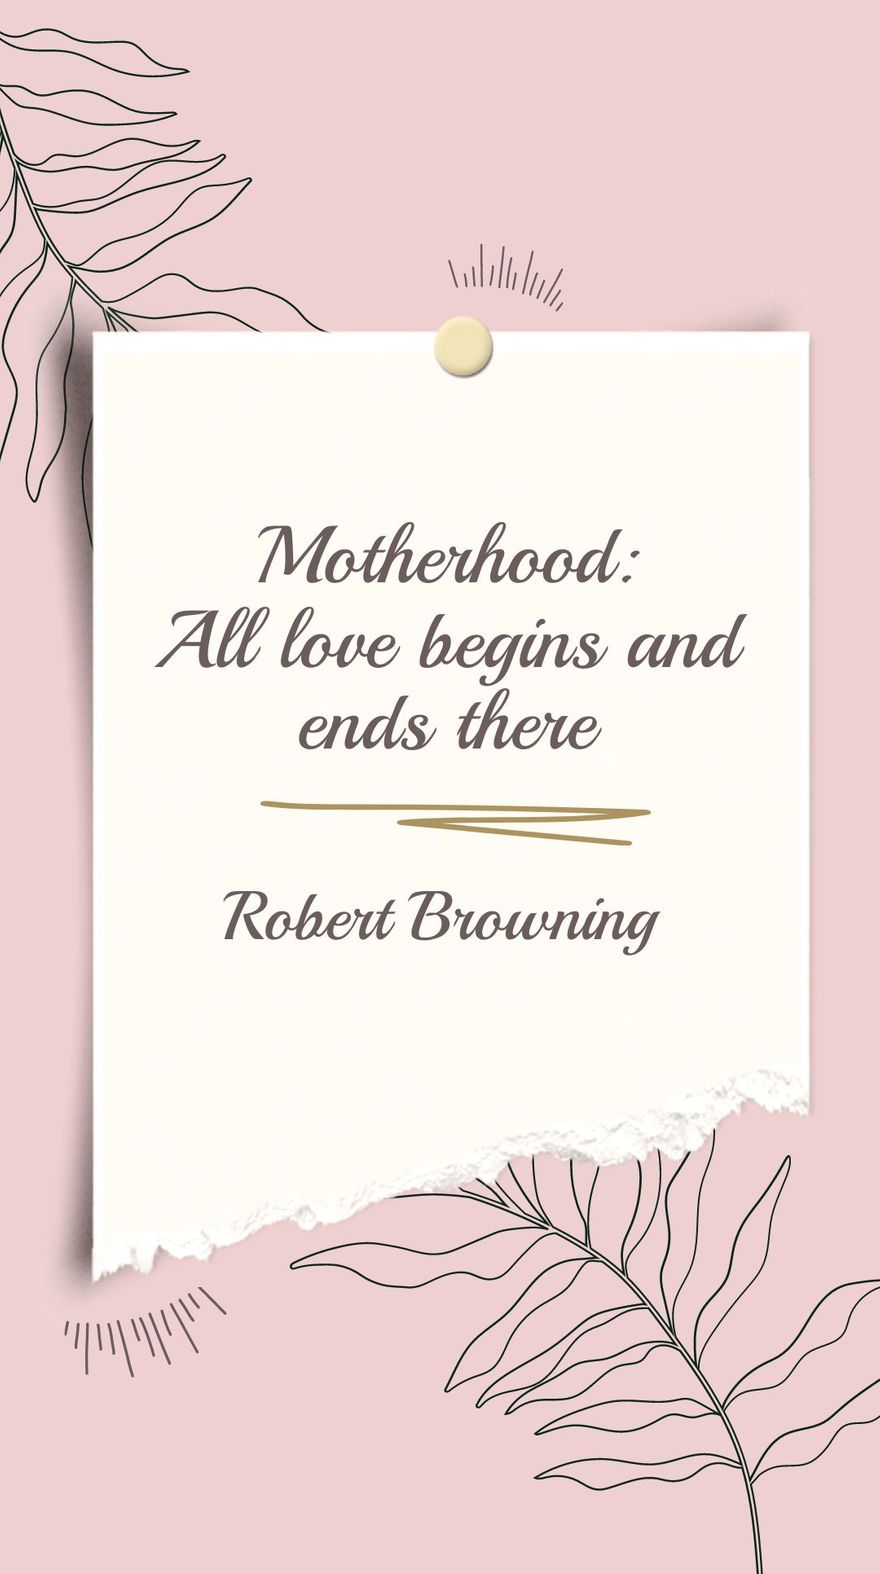 Robert Browning - Motherhood: All love begins and ends there. in JPG